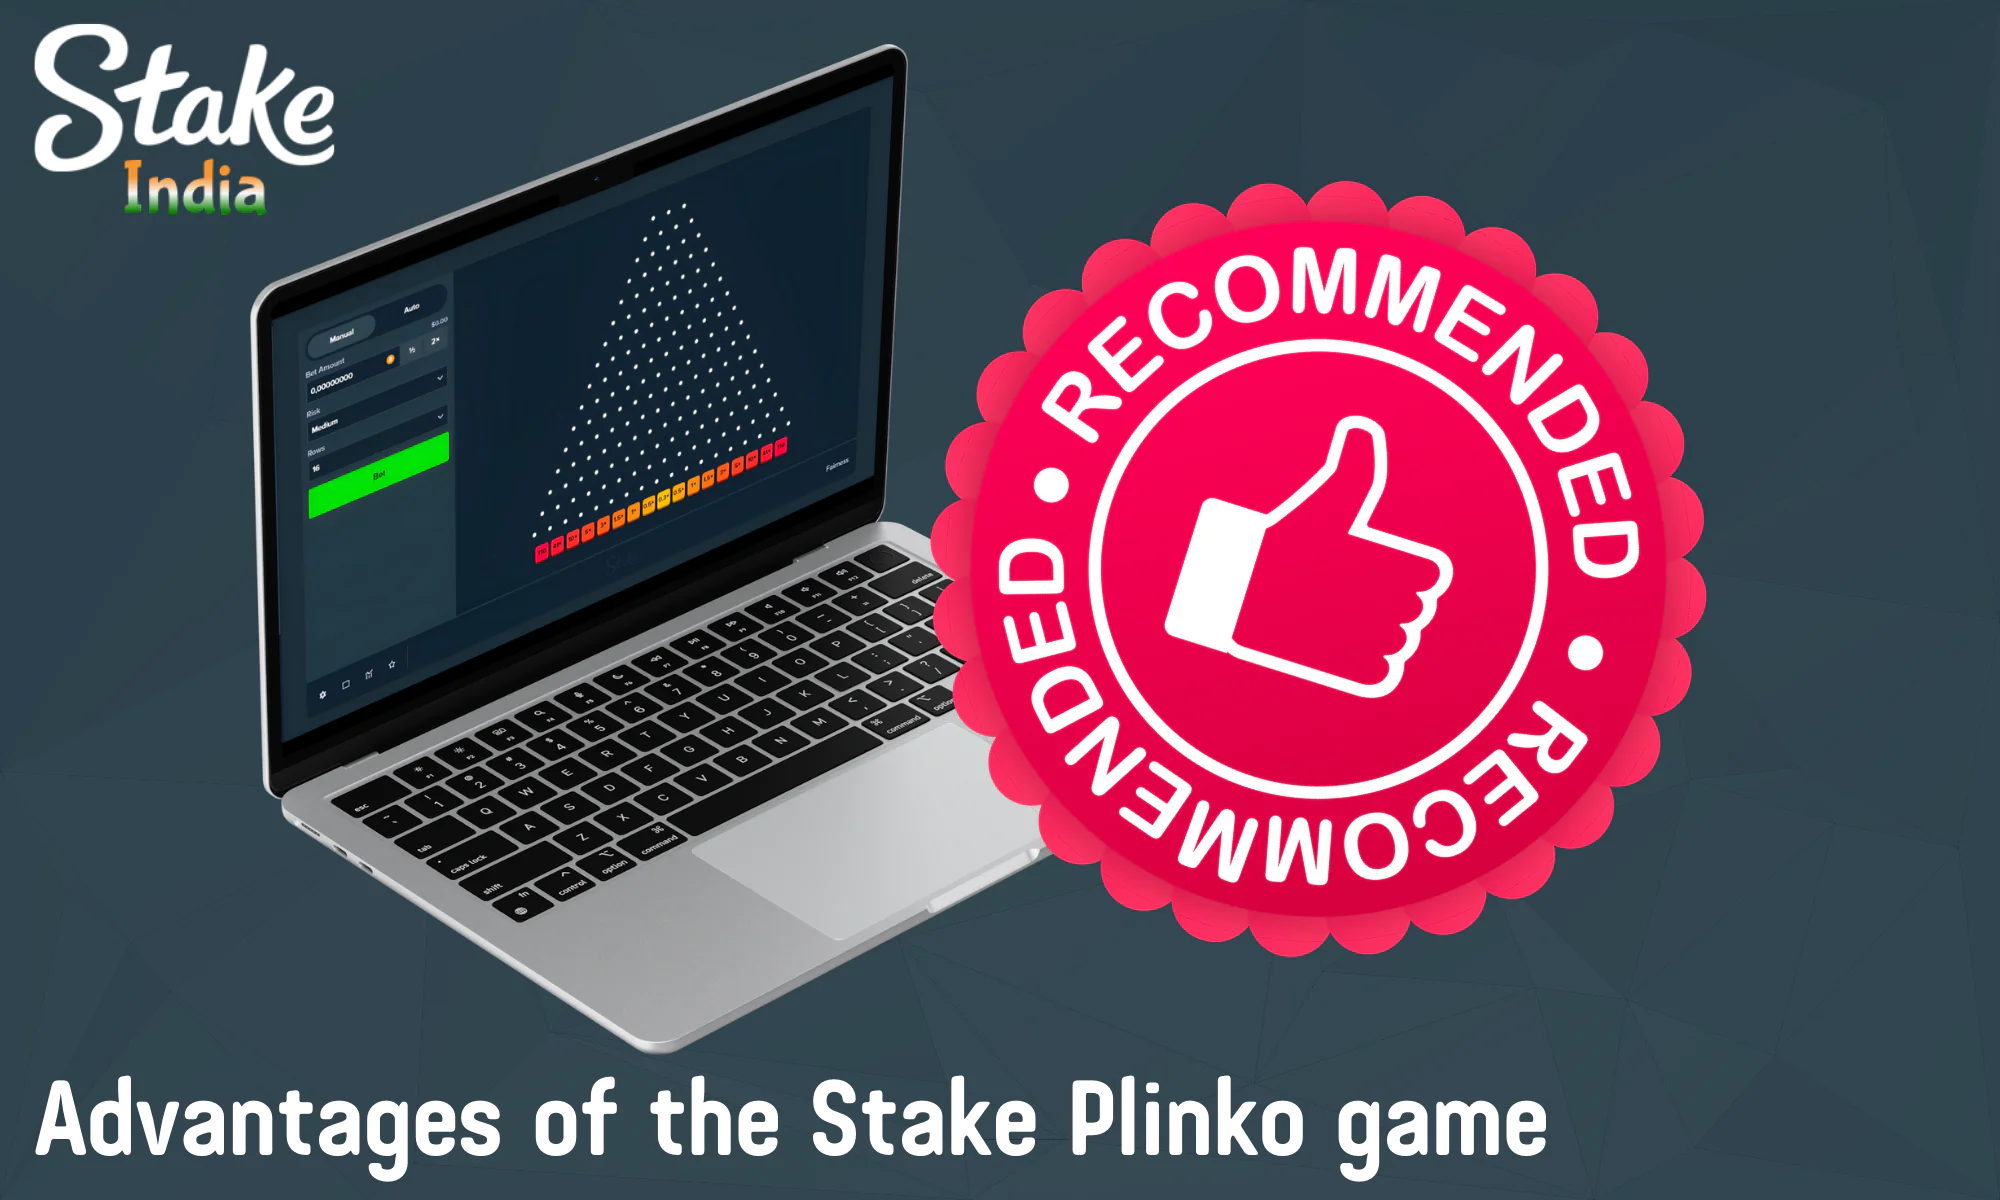 The main advantages of playing Stake Plinko